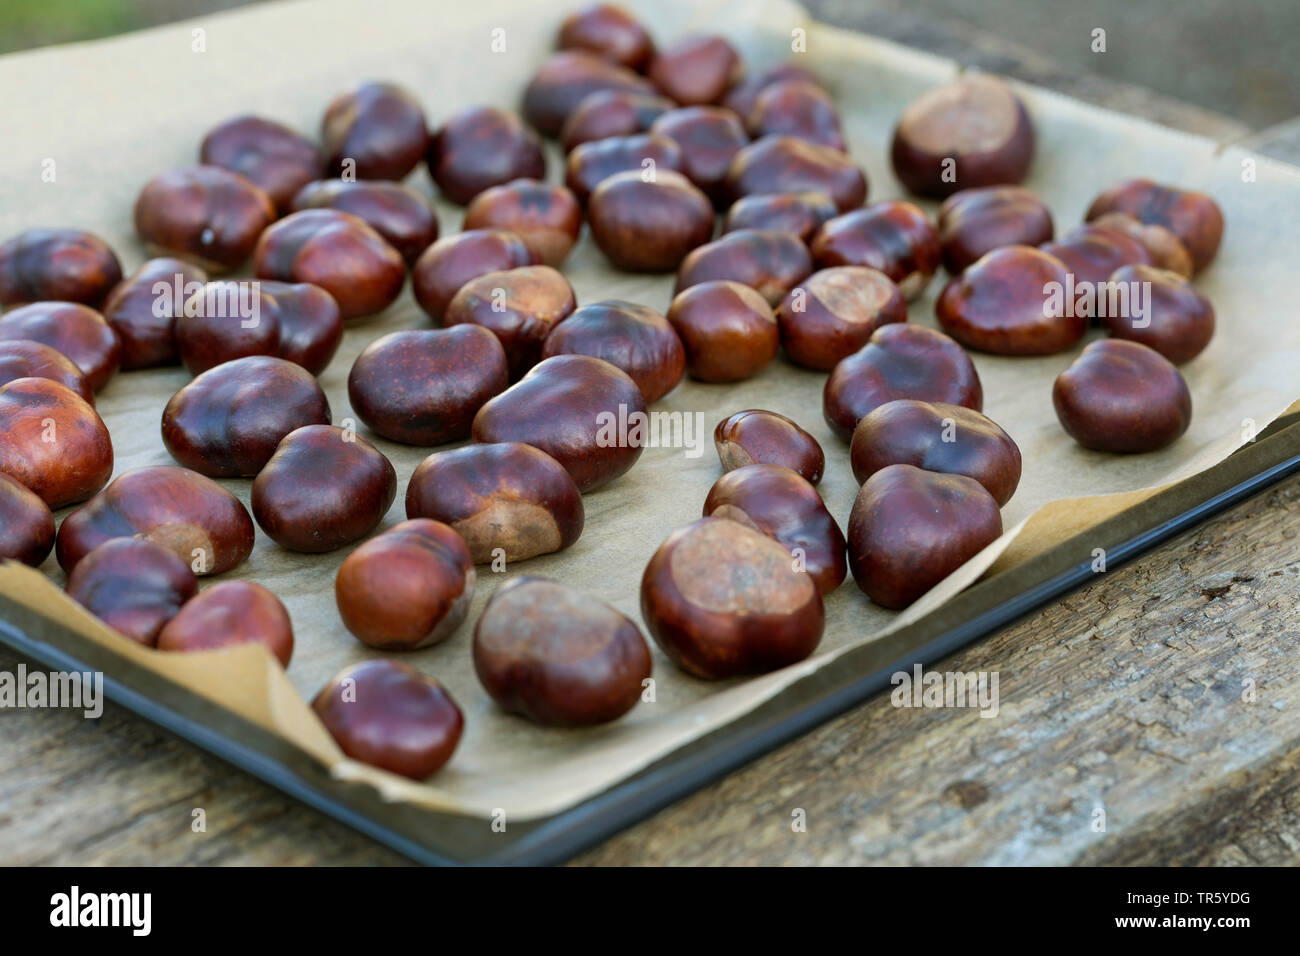 common horse chestnut (Aesculus hippocastanum), Horse Chestnuts are dried, Germany Stock Photo